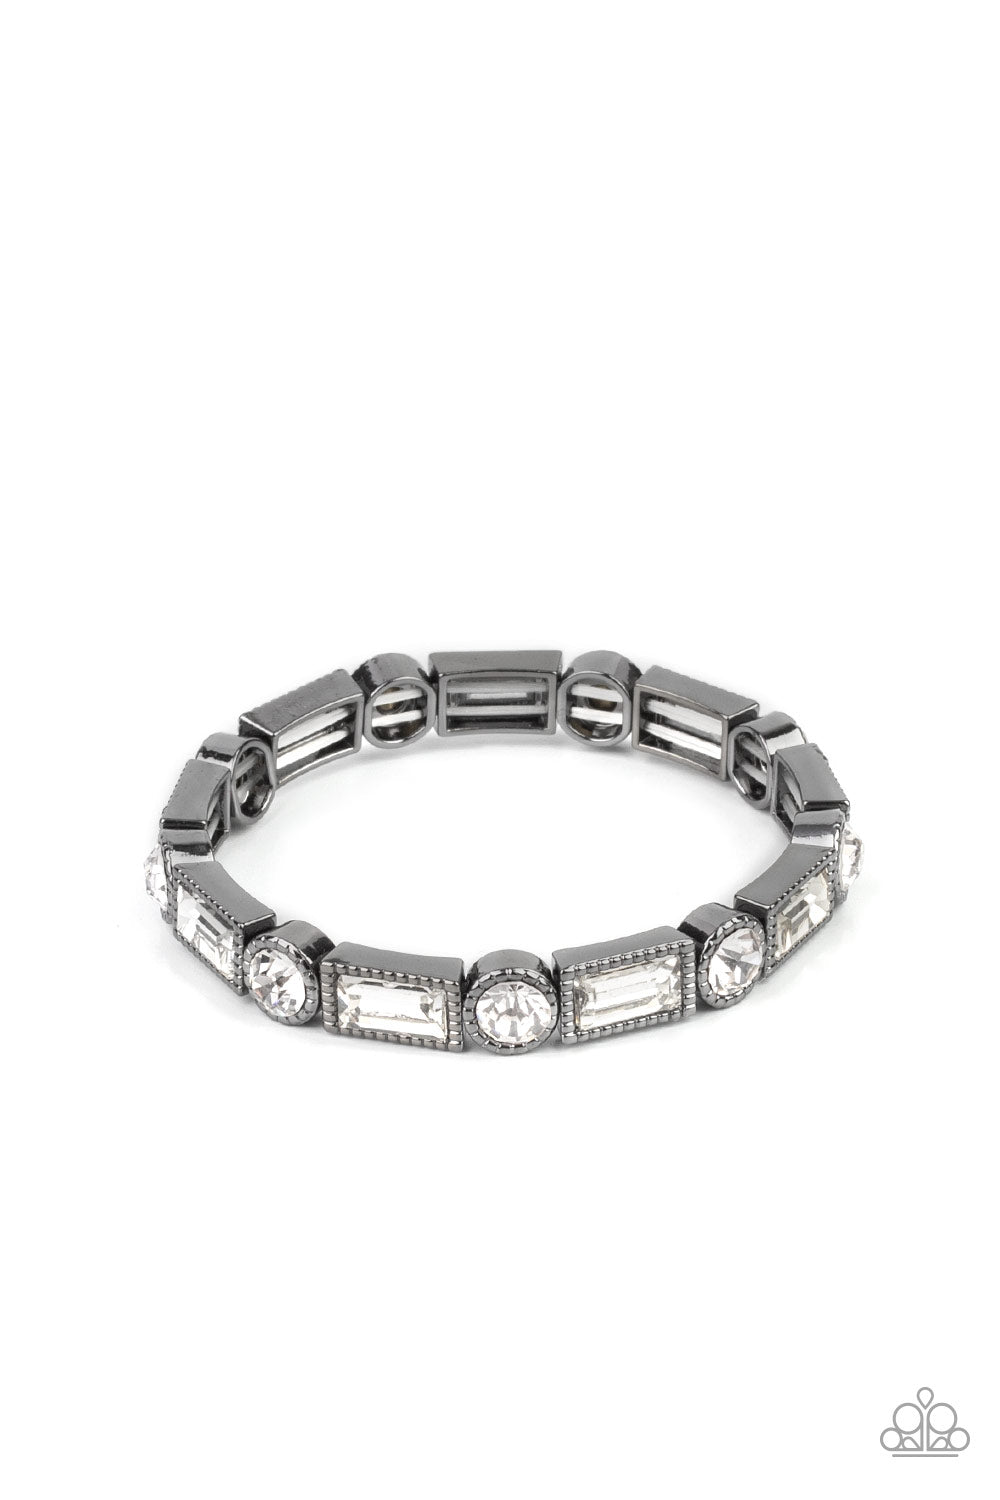 Classic Couture Black Bracelet - Paparazzi Accessories  Classic round and baguette-cut rhinestones set in shiny dotted gunmetal frames alternate around the wrist on stretchy bands for a shimmering finish.  Sold as one bracelet.